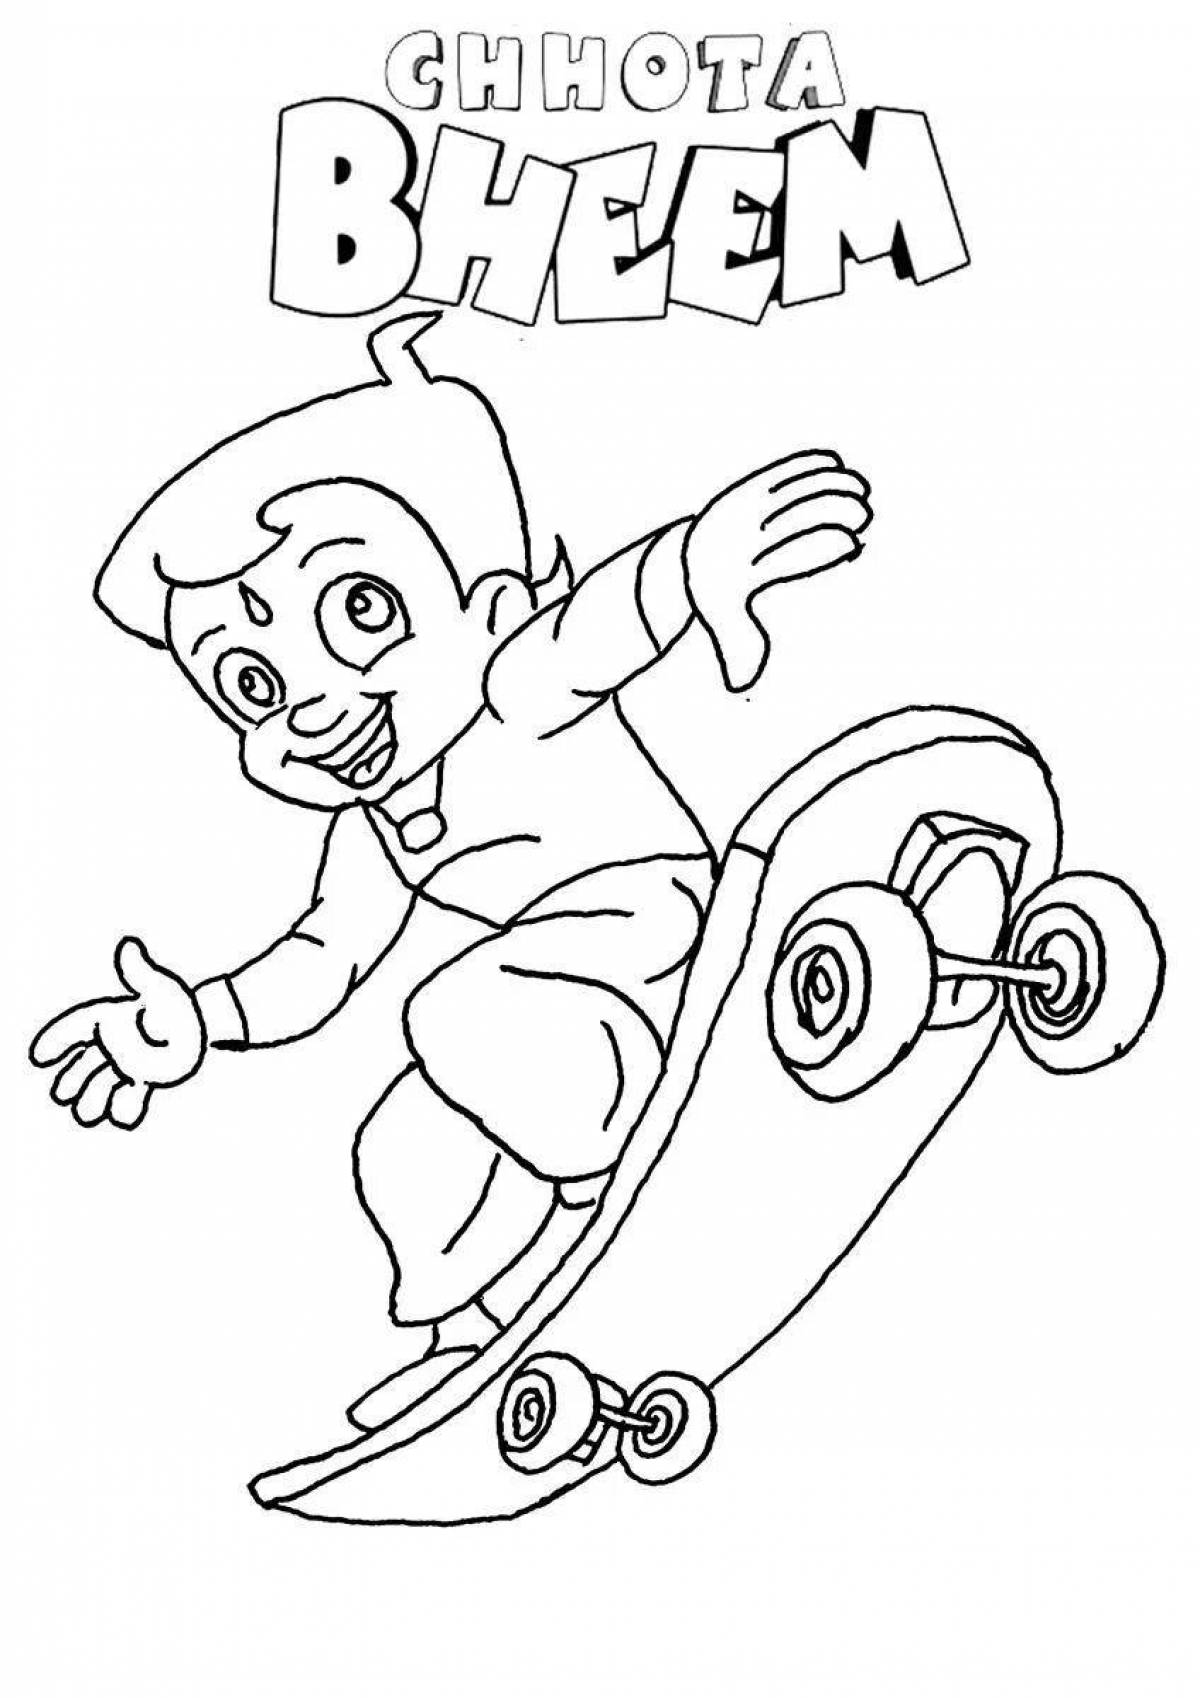 Color-frenzy skateboard coloring book for kids